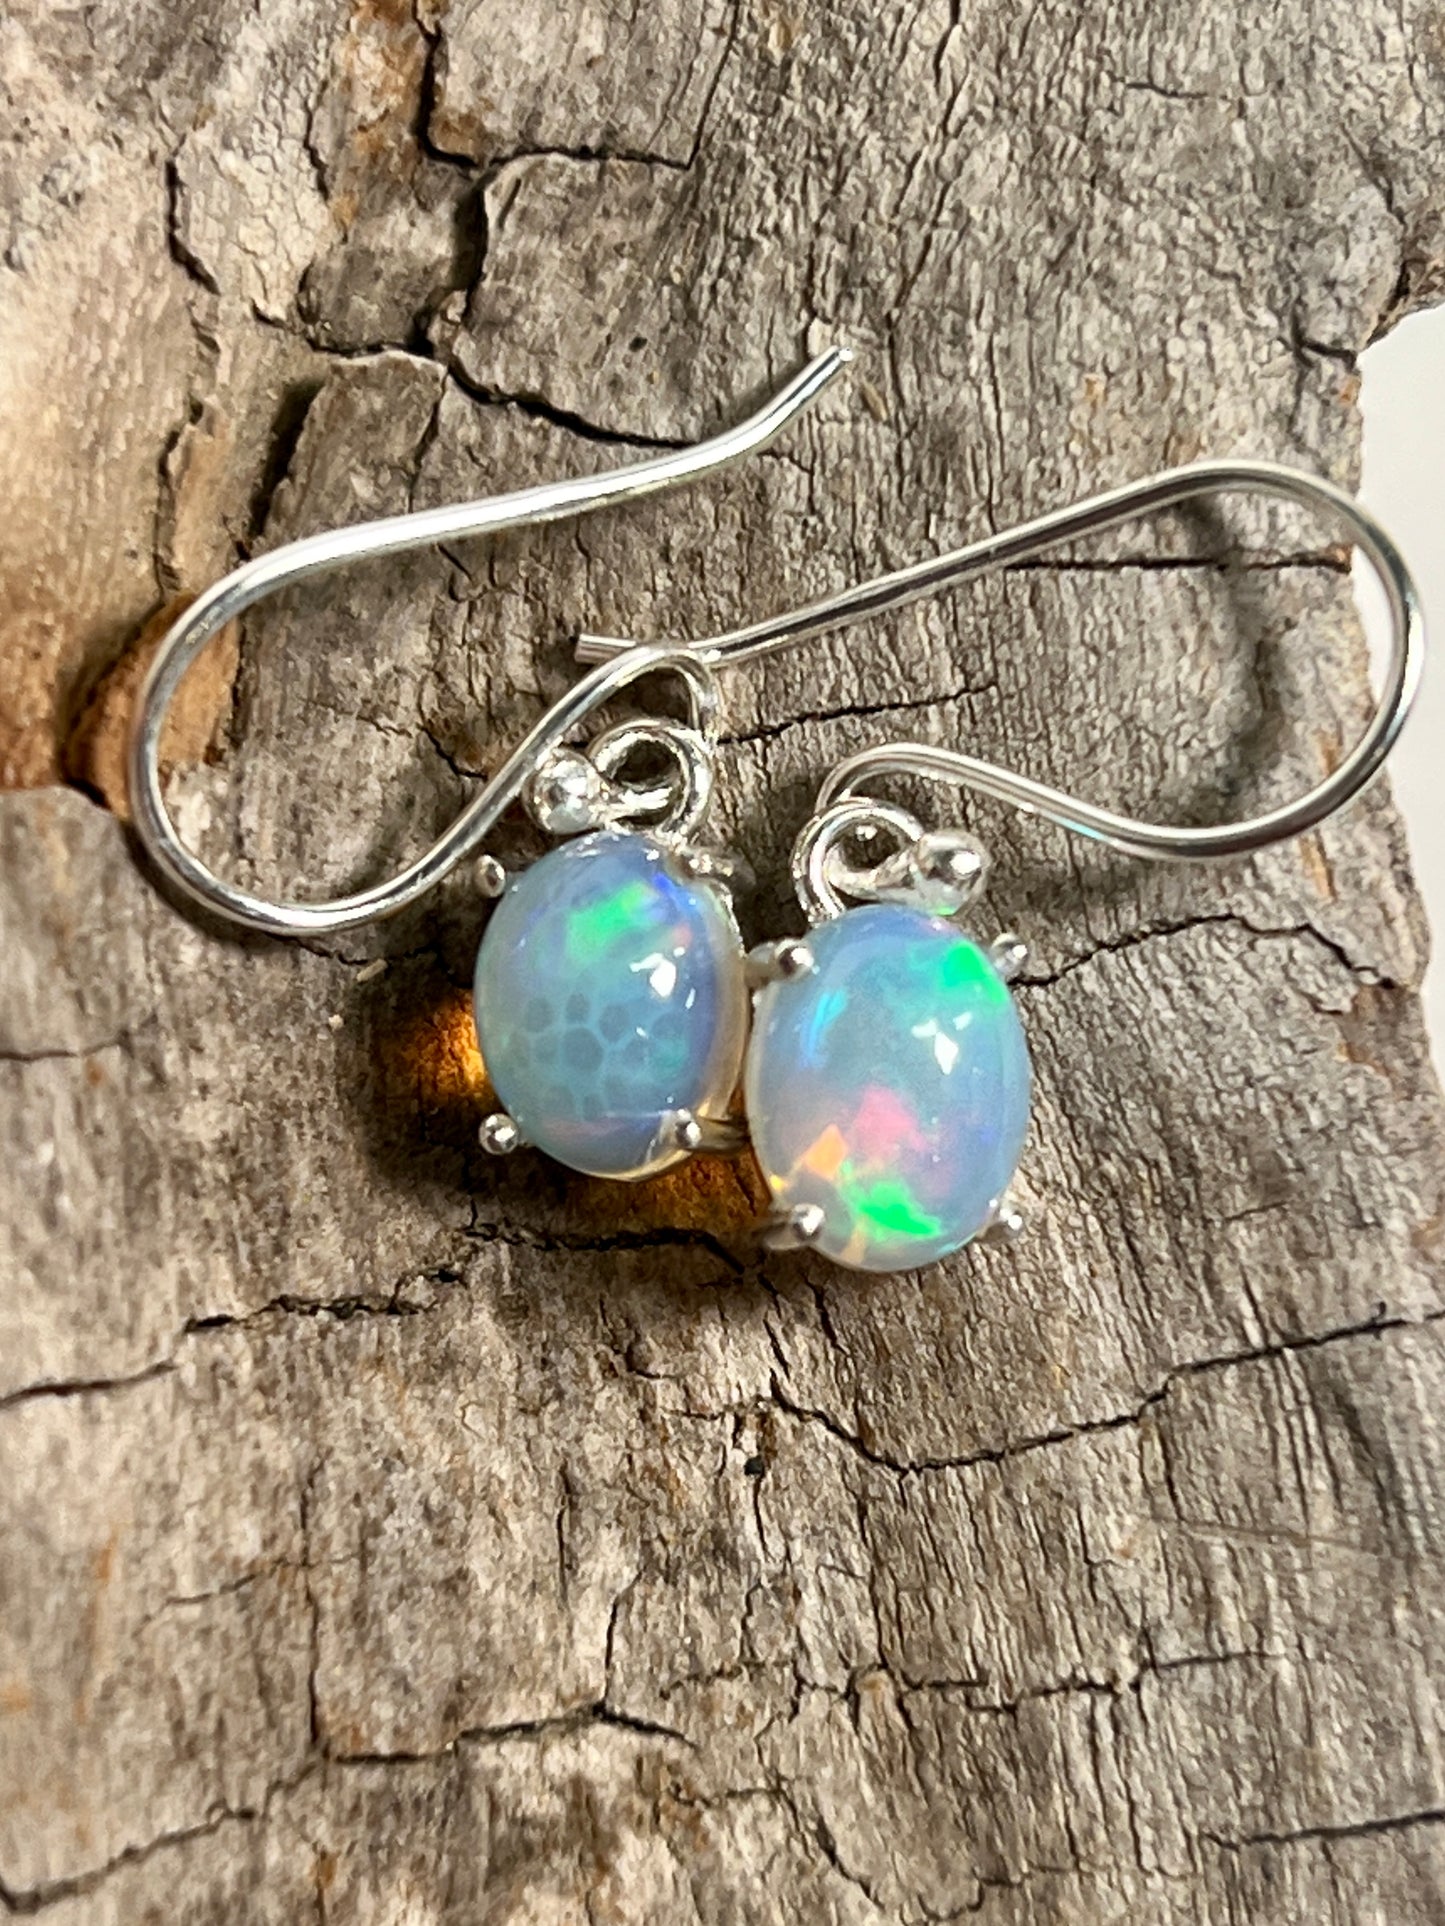 A pair of Vibrant Oval Ethiopian Opal Earrings from Super Silver, exuding natural brilliance on a piece of wood.